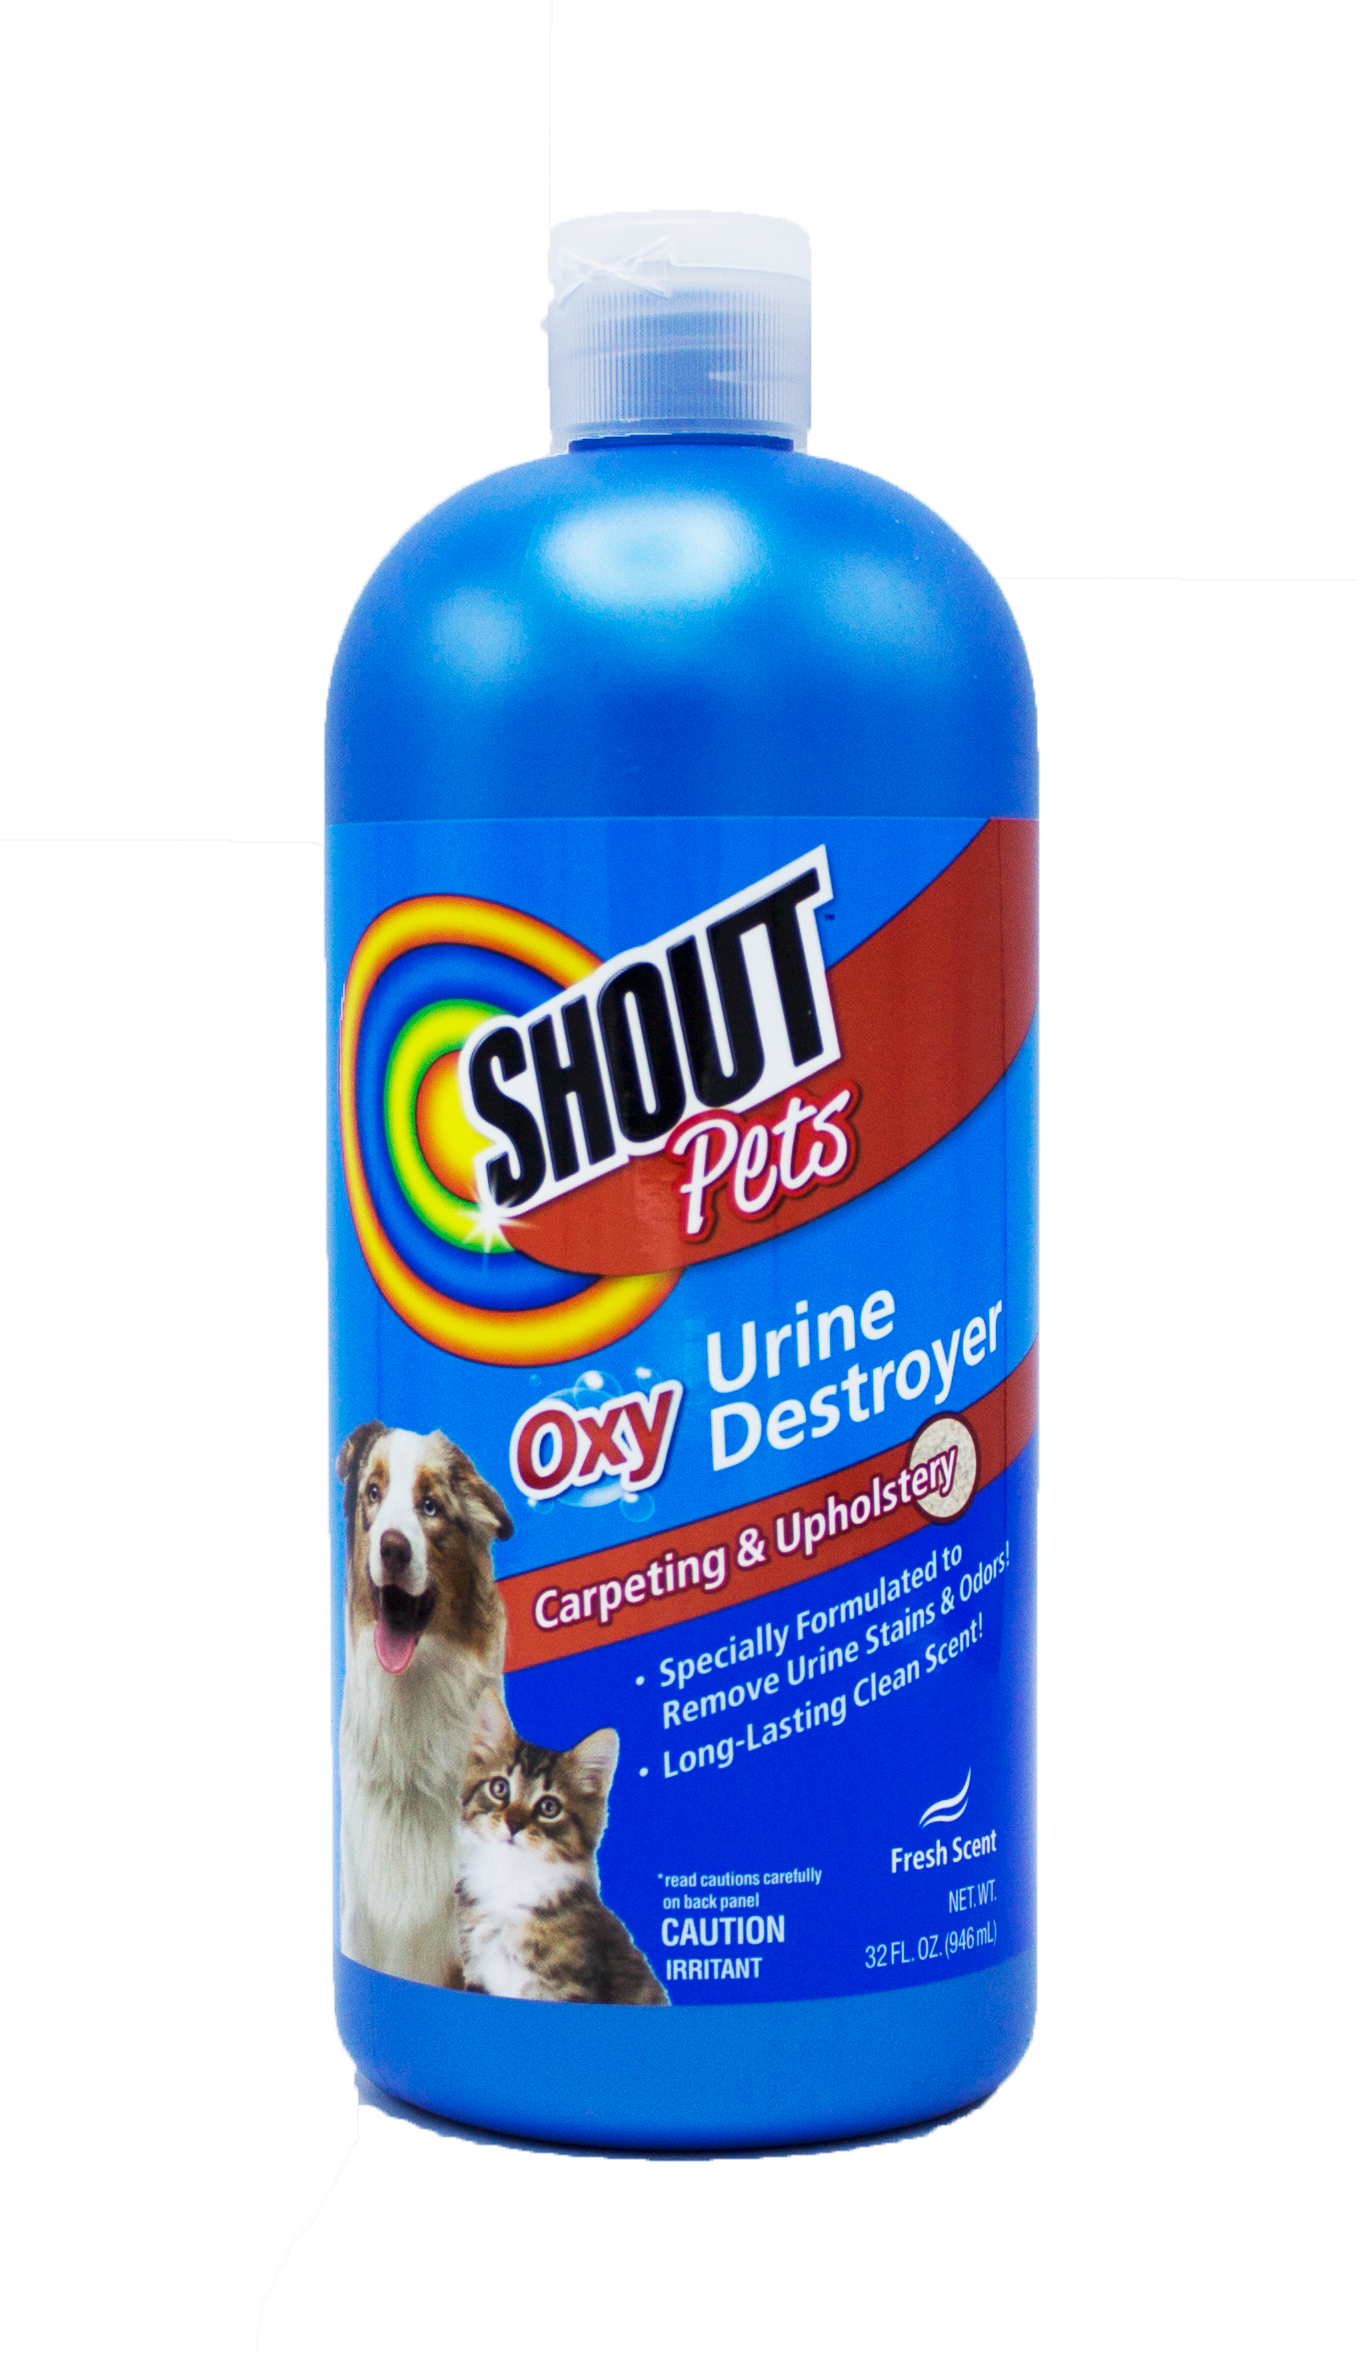 Shout Auto Carpet & Upholstery Cleaner - 22 oz